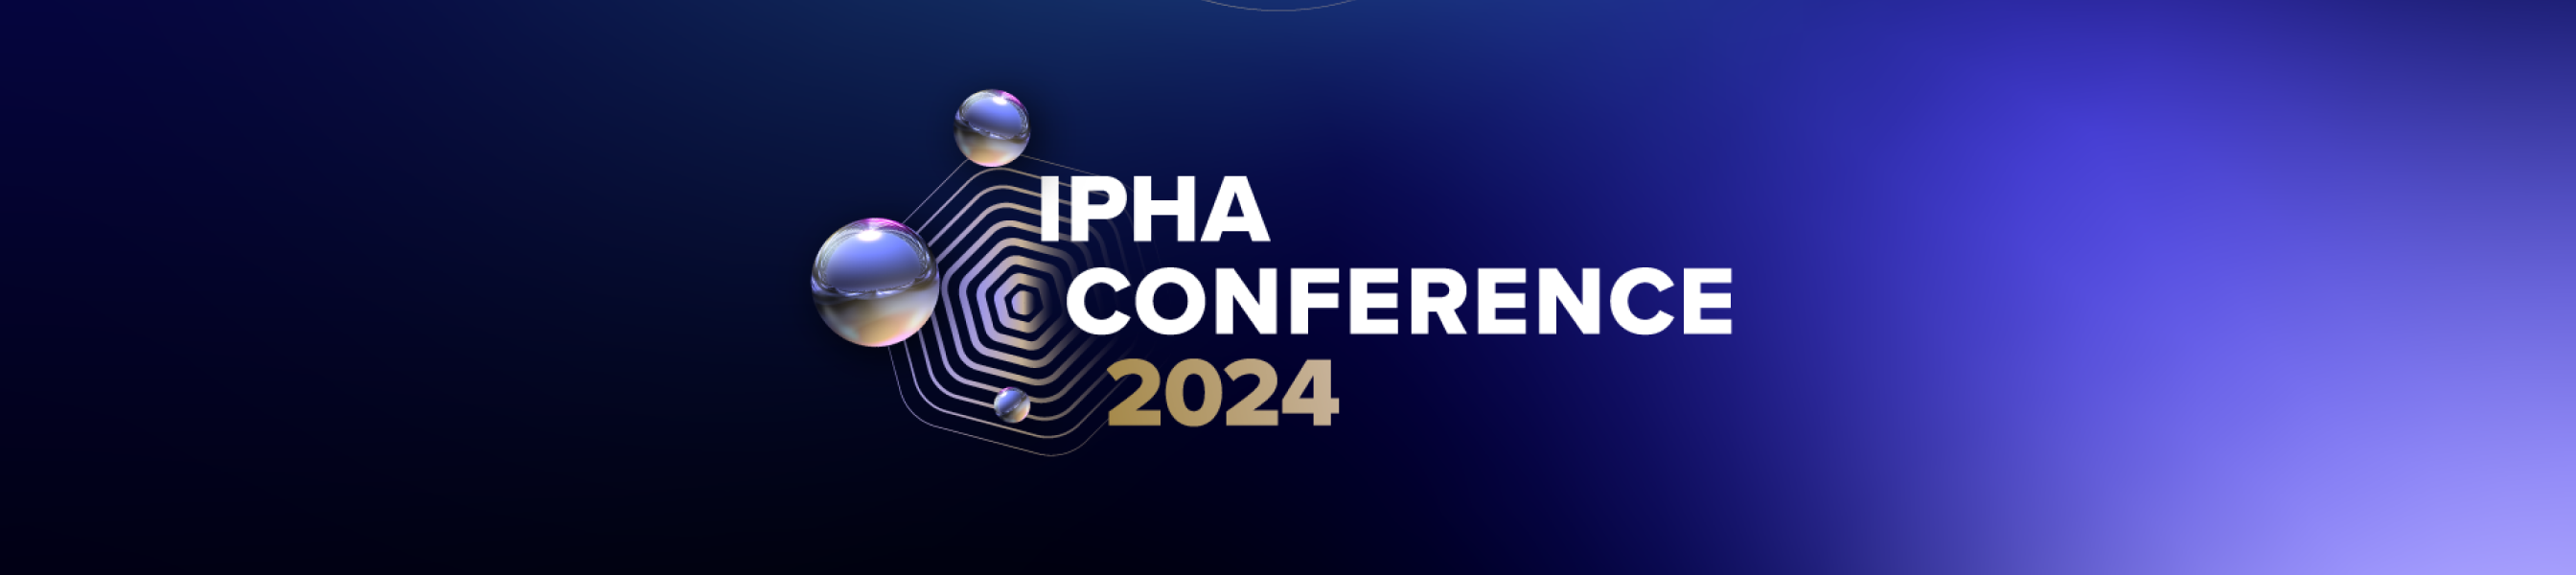 IPHA Conference 2024 - Visual Identity